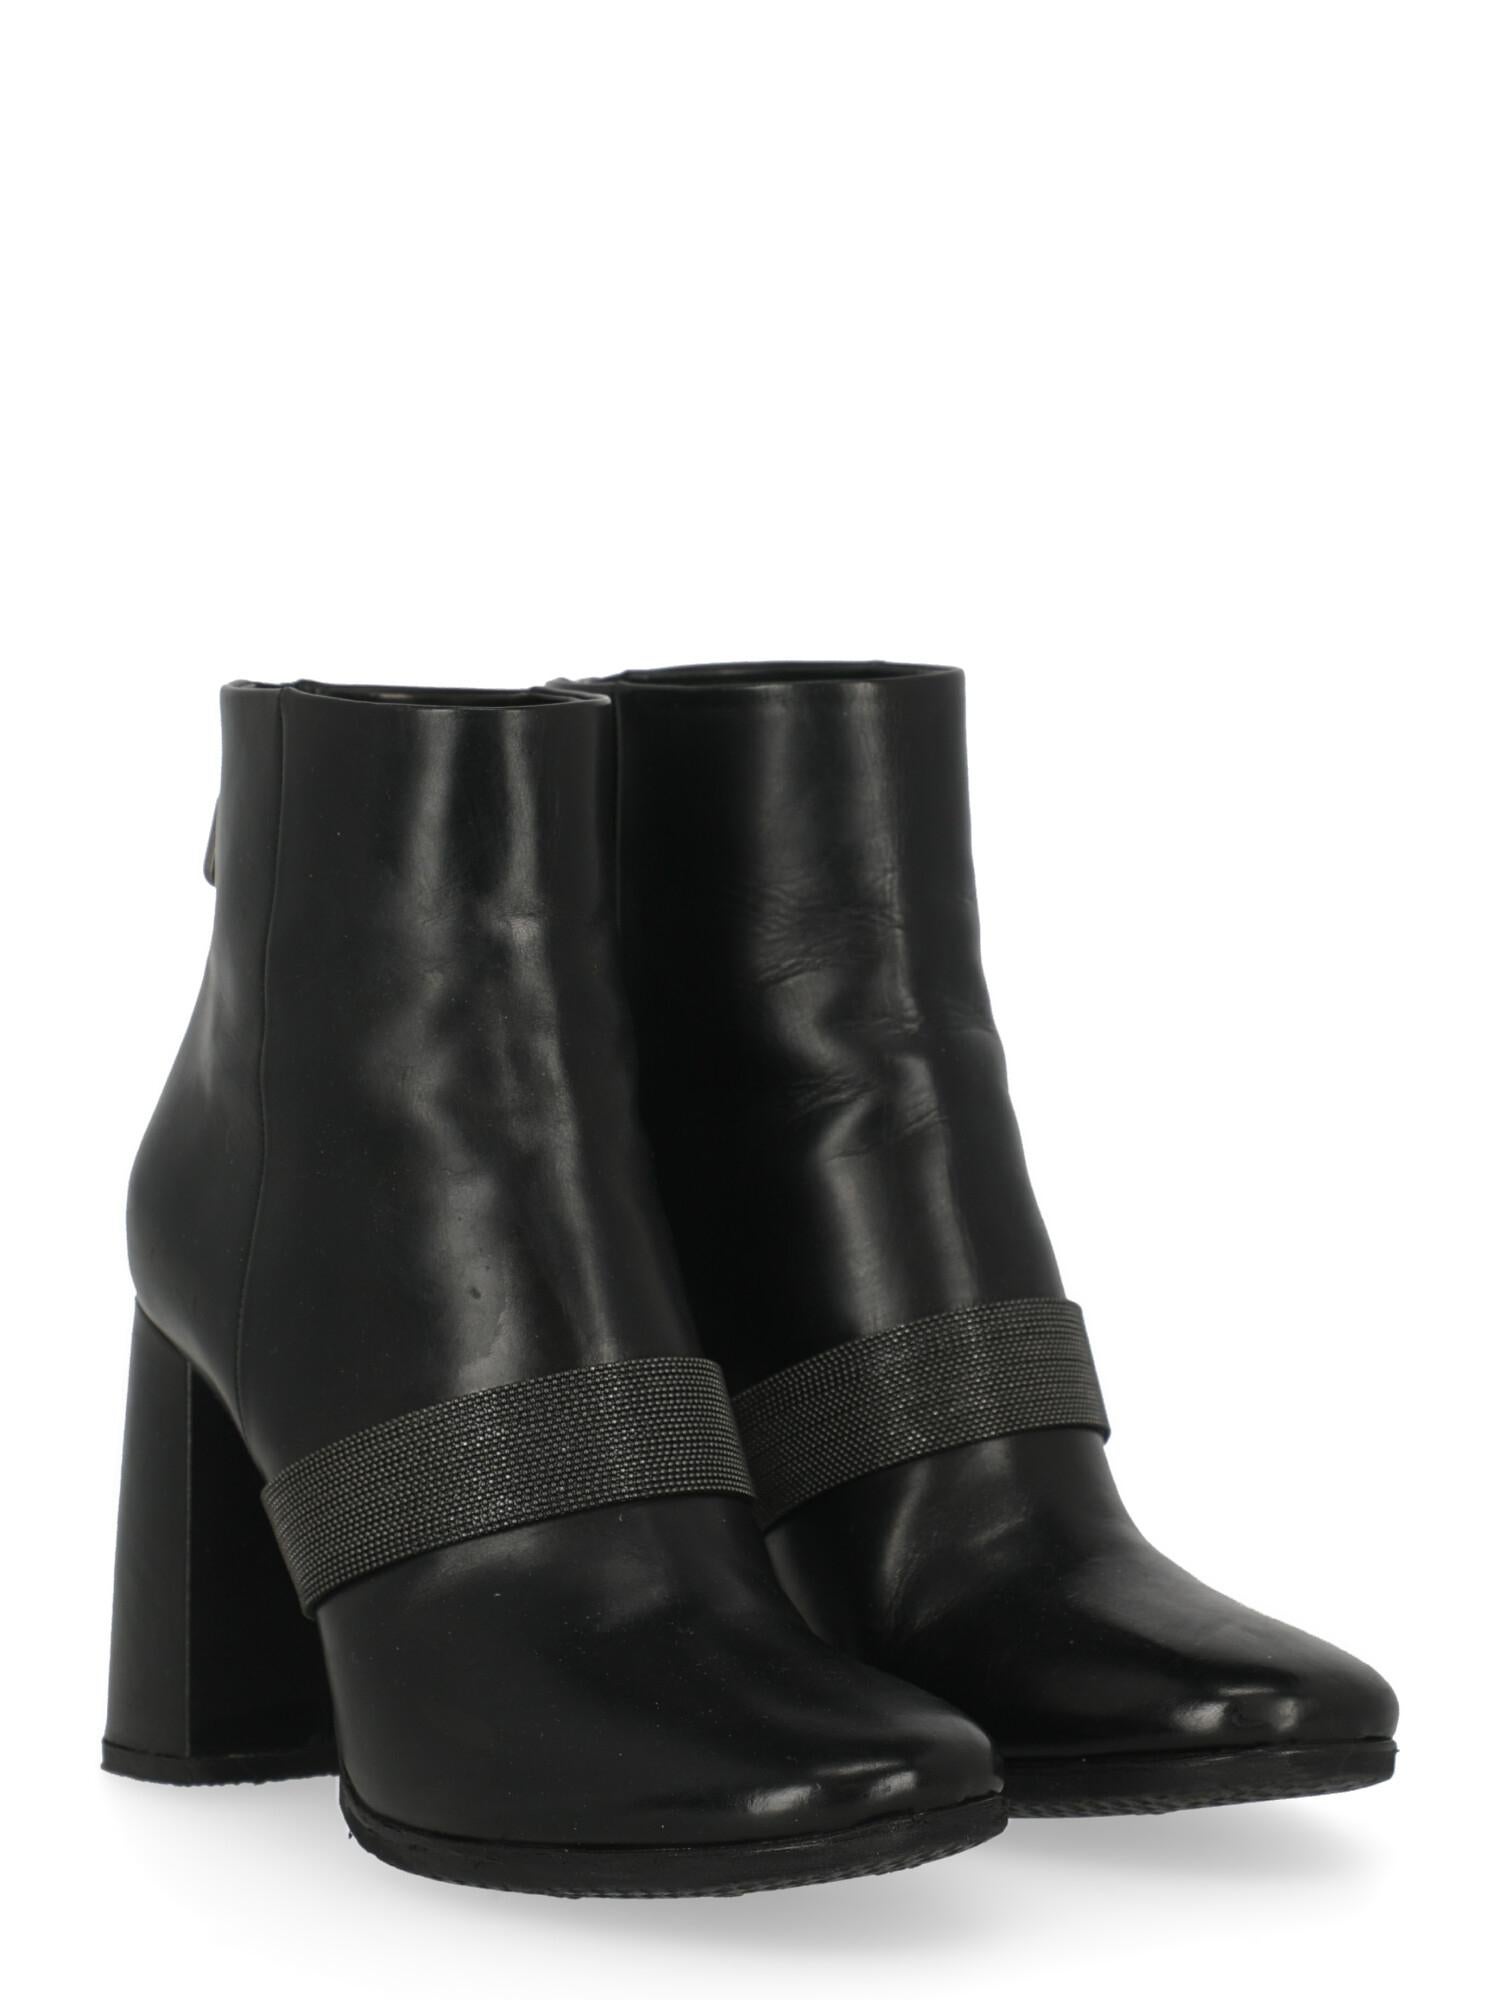 Ankle boots, leather, solid color, iconic detail, back zipper fastening, ruthenium hardware, round toe, branded sole, block heel, mid heel, metal application

Includes:
- Dust bag
- Box

Product Condition: Very Good
Sole: partially substituted.